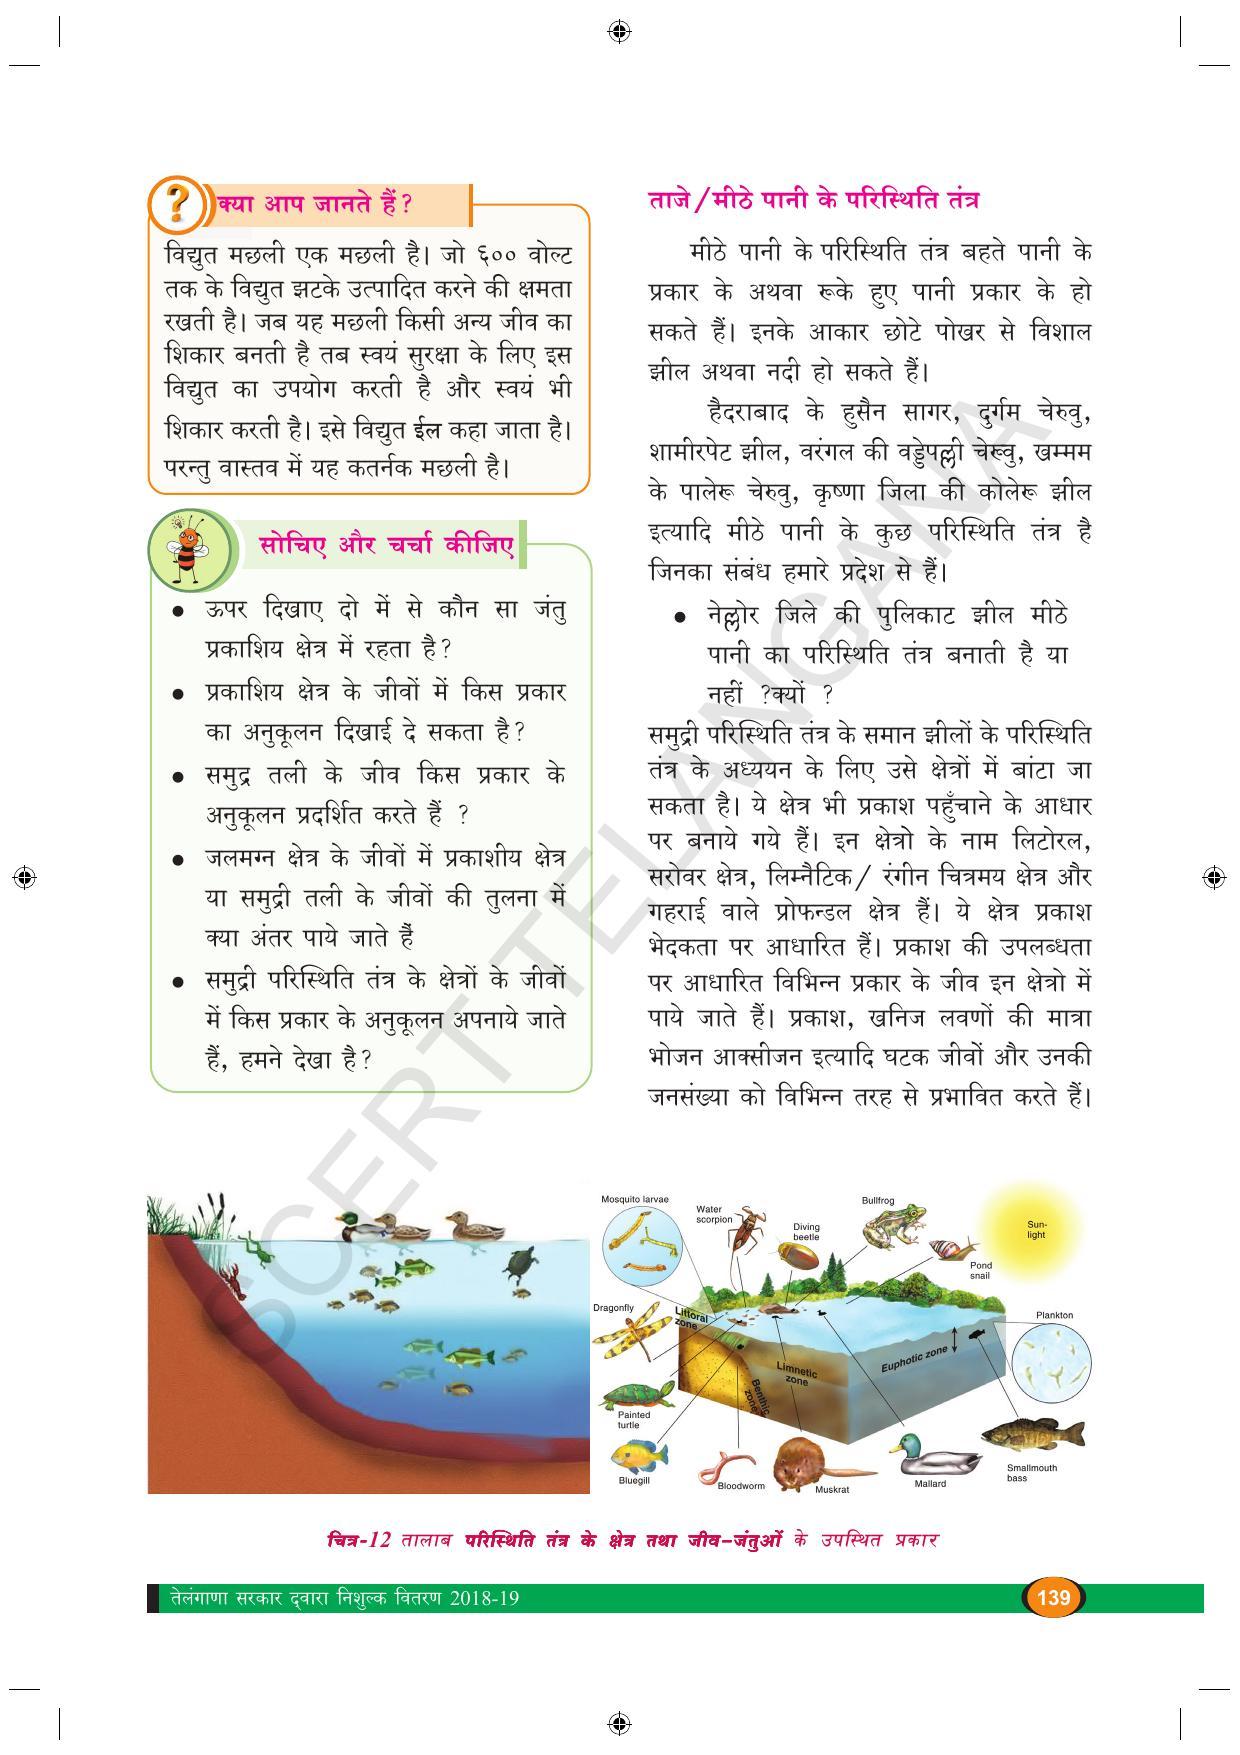 TS SCERT Class 9 Biological Science (Hindi Medium) Text Book - Page 151